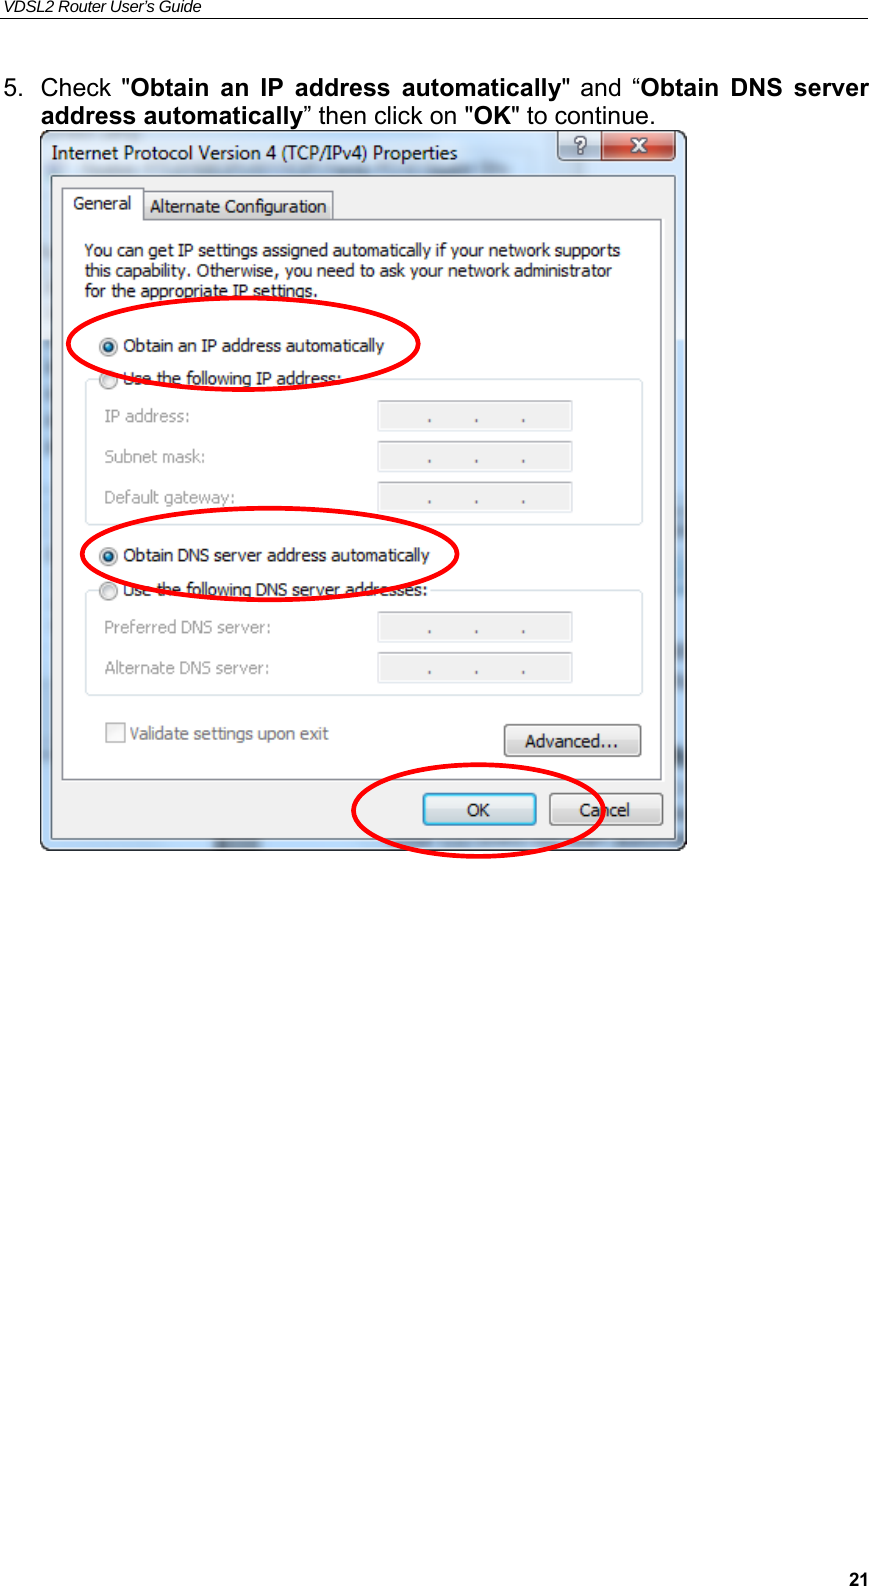 VDSL2 Router User’s Guide     215.  Check  &quot;Obtain  an  IP  address  automatically&quot;  and  “Obtain  DNS  server address automatically” then click on &quot;OK&quot; to continue.                     